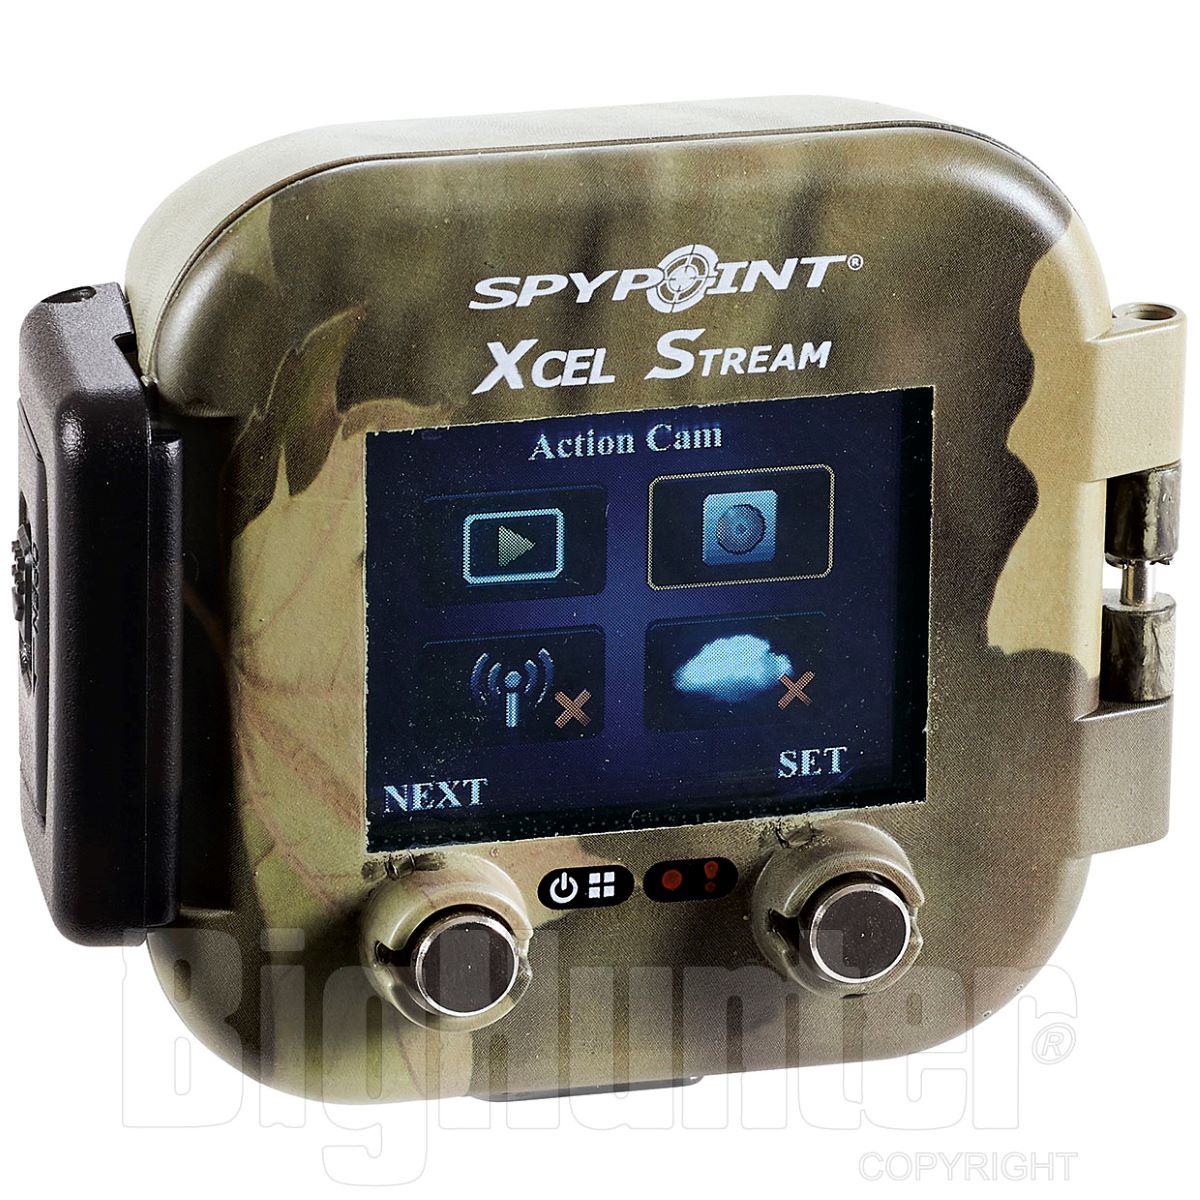 How To Use Head Accessories For The Xcel Stream Action Camera